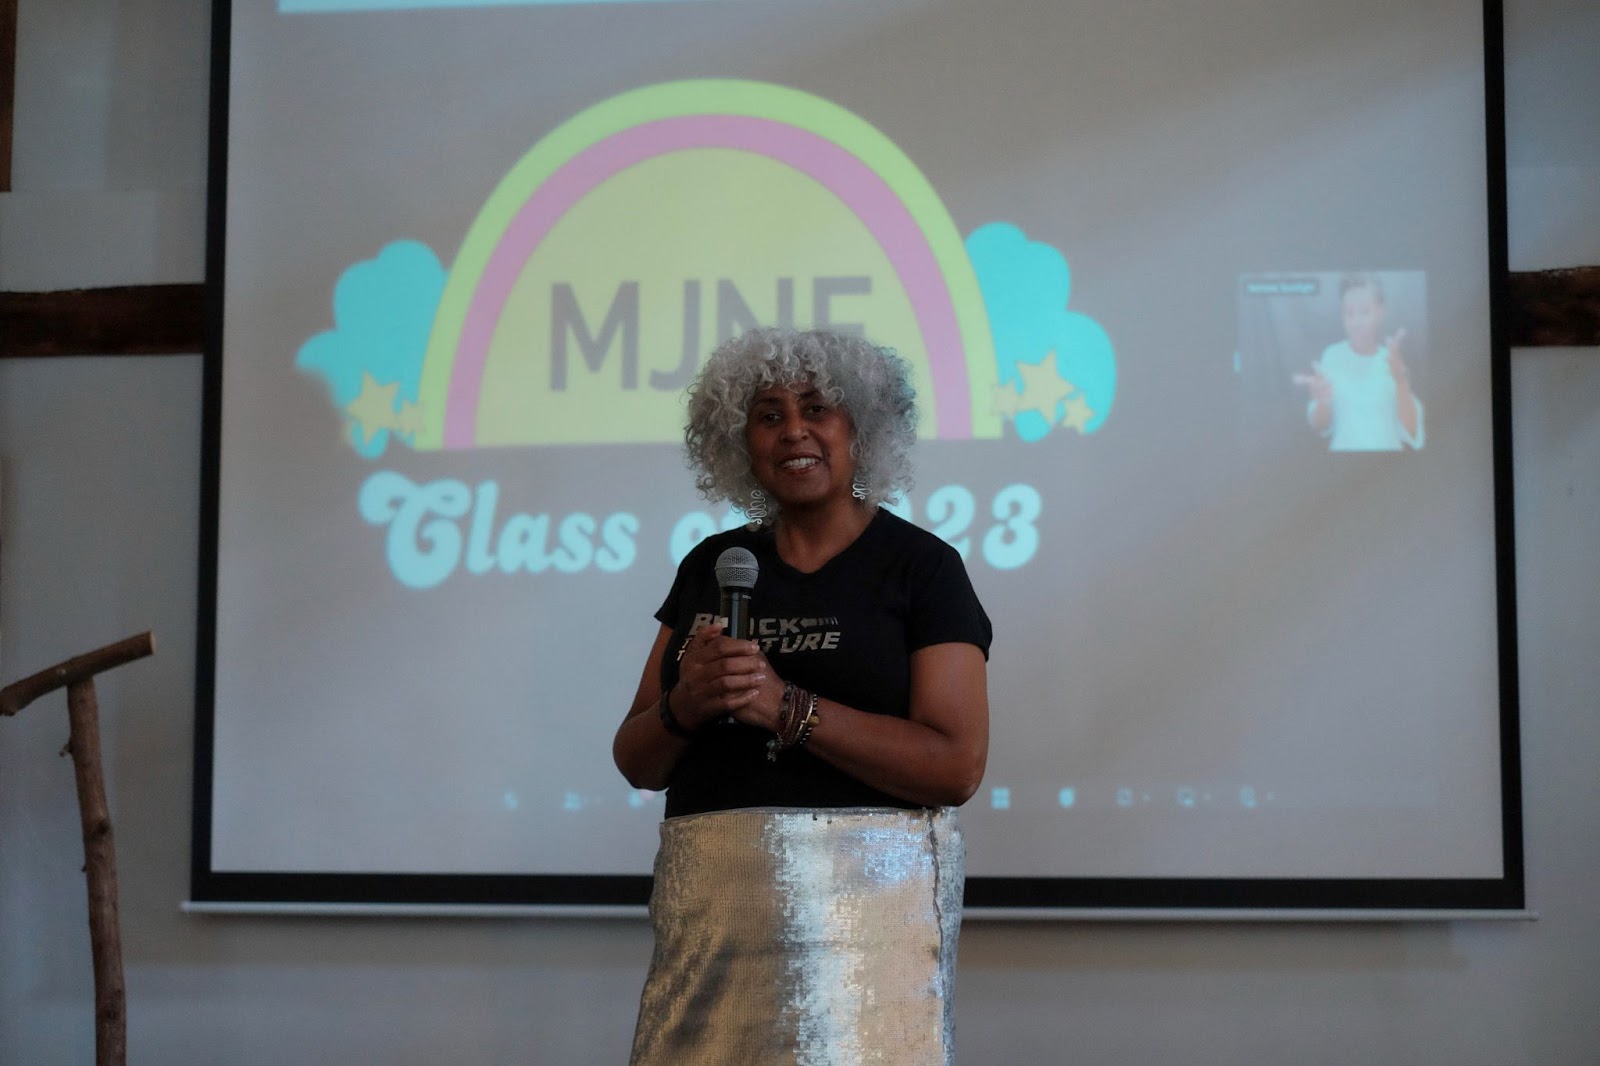 Keynote speaker and movement communications trailblazer Makani Themba speaks in front of a projector screen reading 'MJNF Class of 2023', wearing a shirt that reads 'Black to the Future'